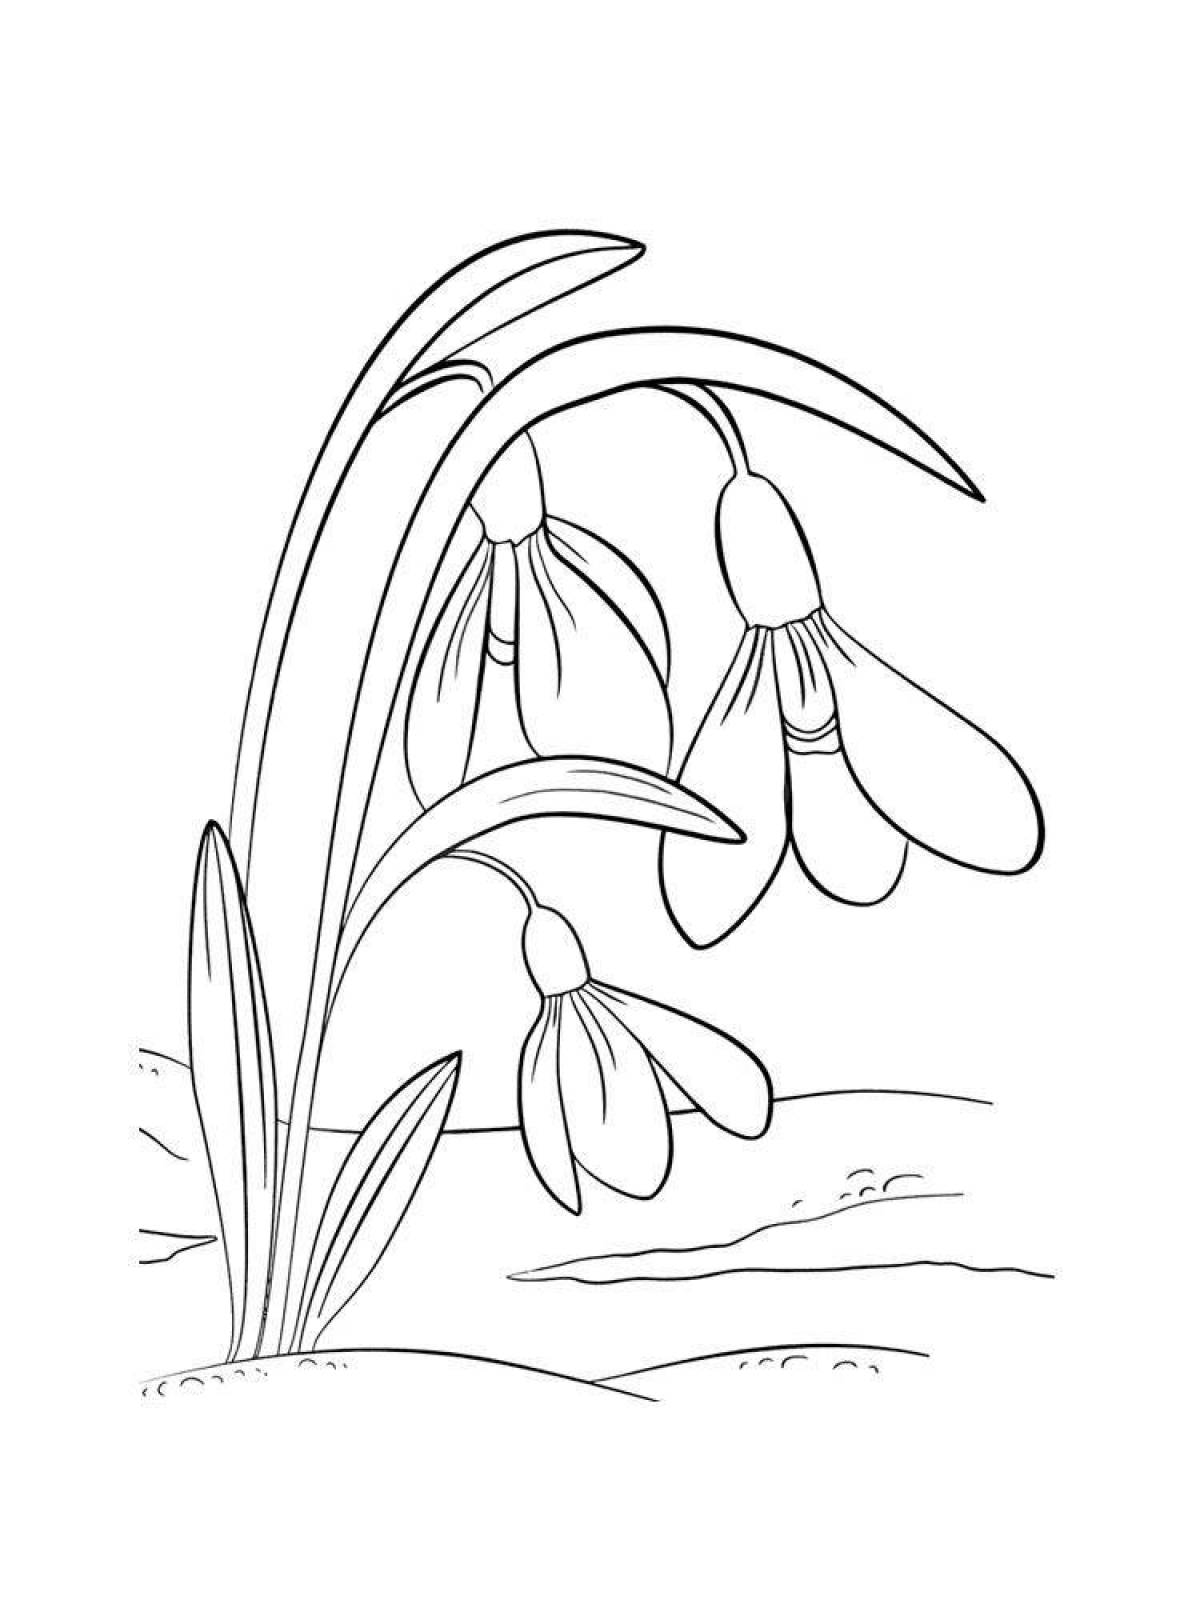 Snowdrop coloring pages for kids